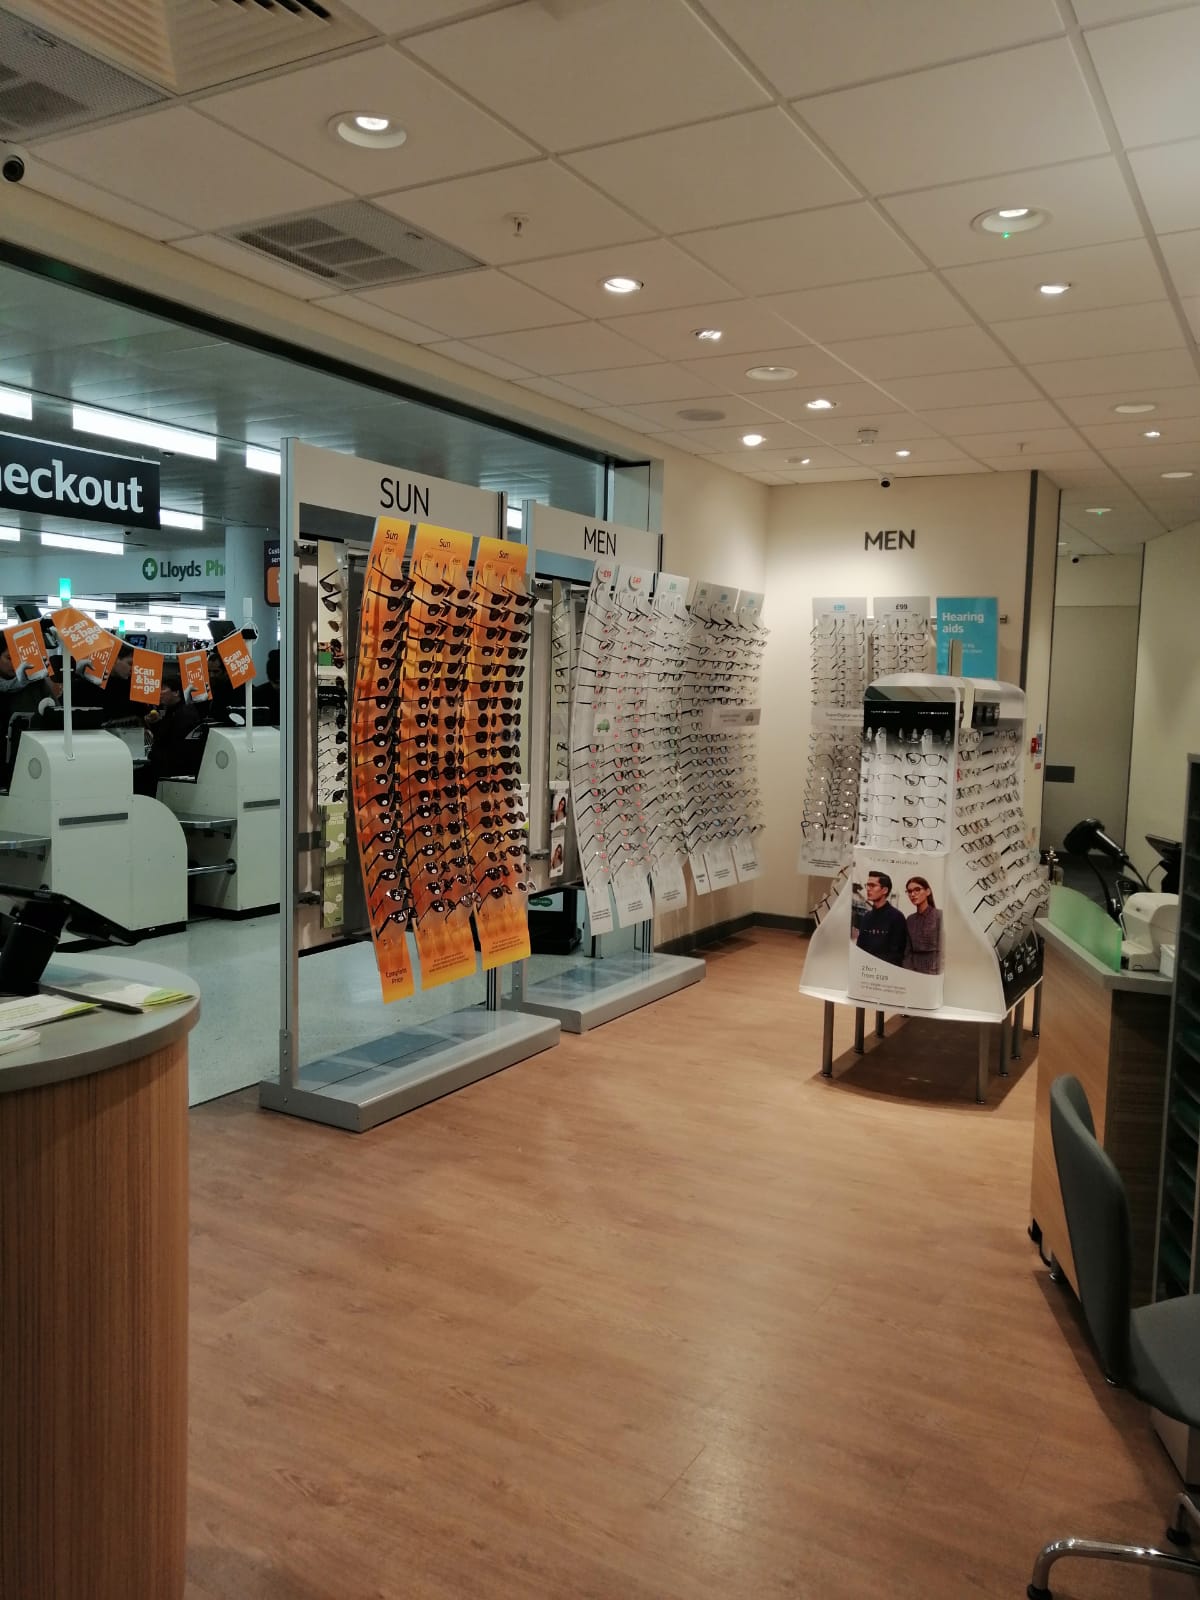 Images Specsavers Opticians and Audiologists - Kensington Sainsbury's